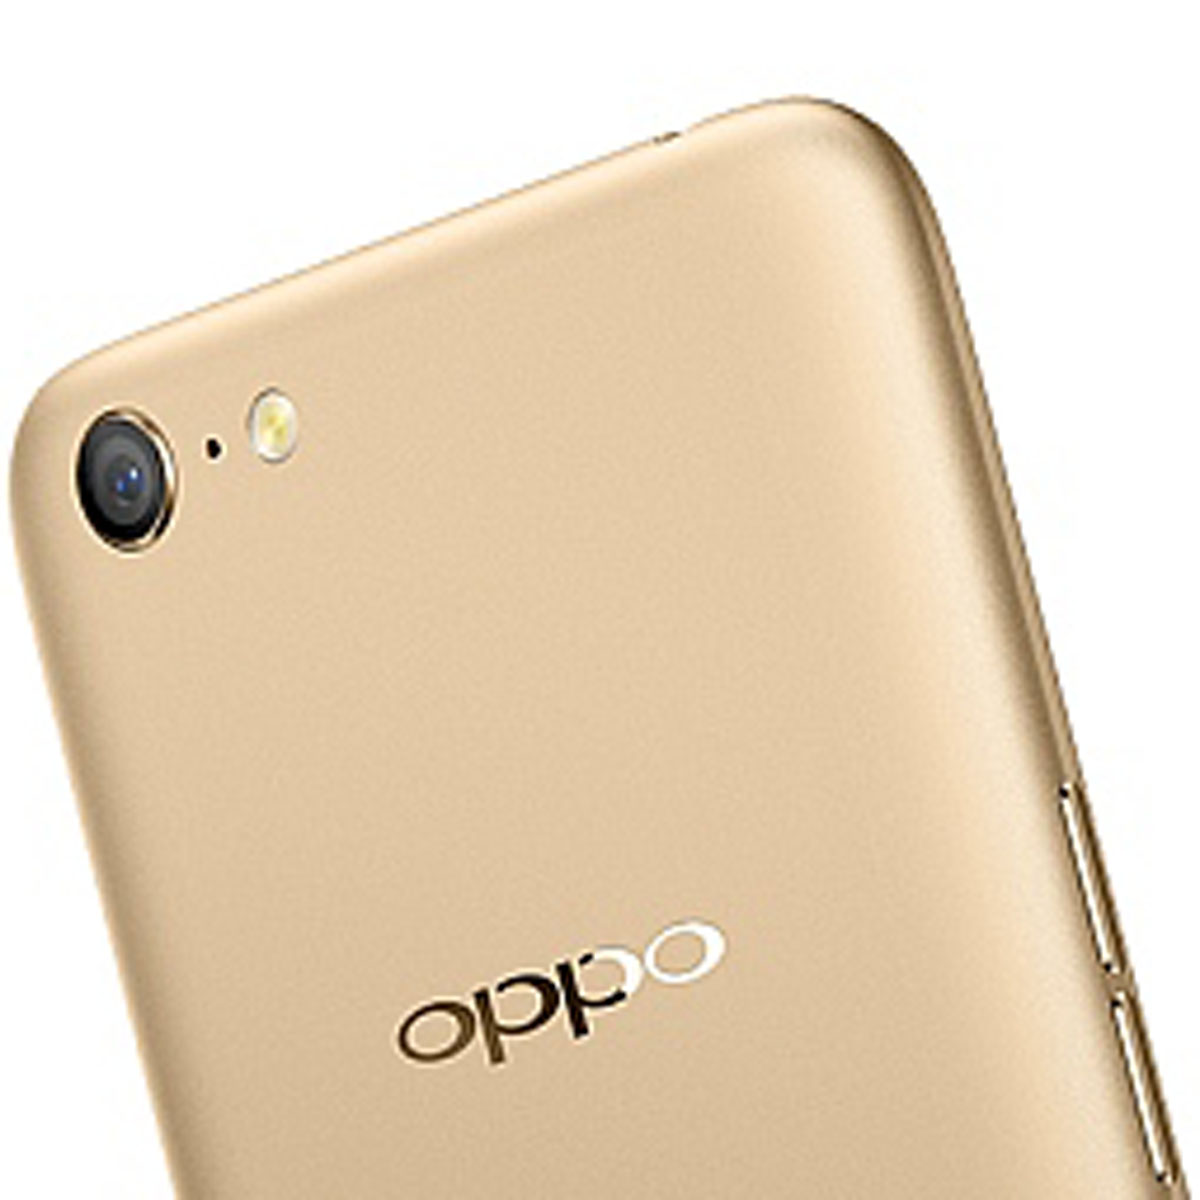 Oppo a71 gold small 1504618242062